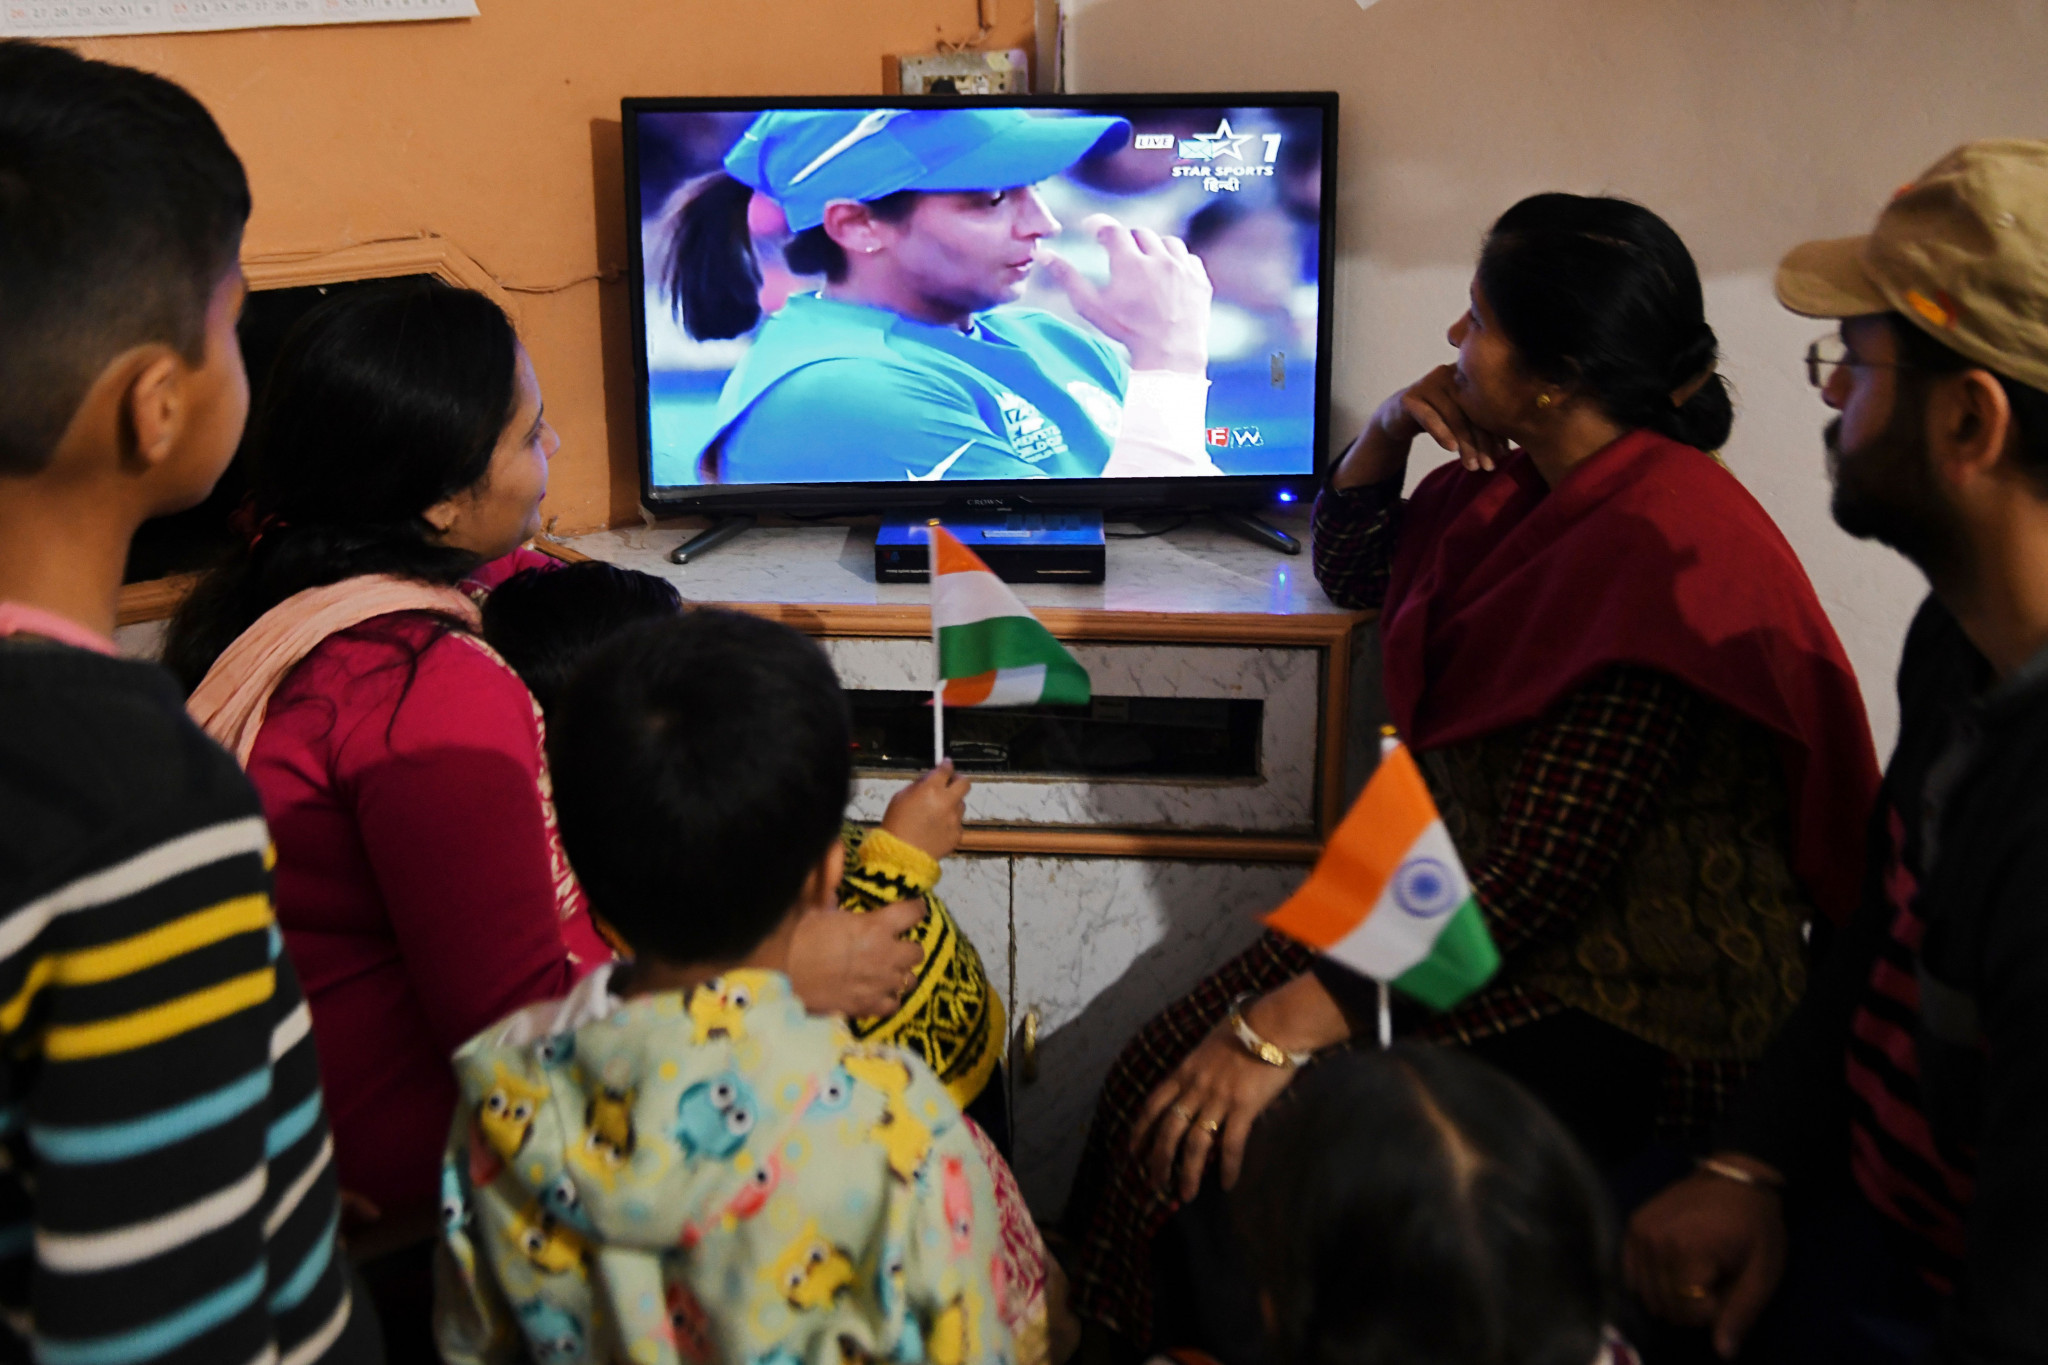 Viewing figures rose in India with the team enjoying a run to the final ©Getty Images